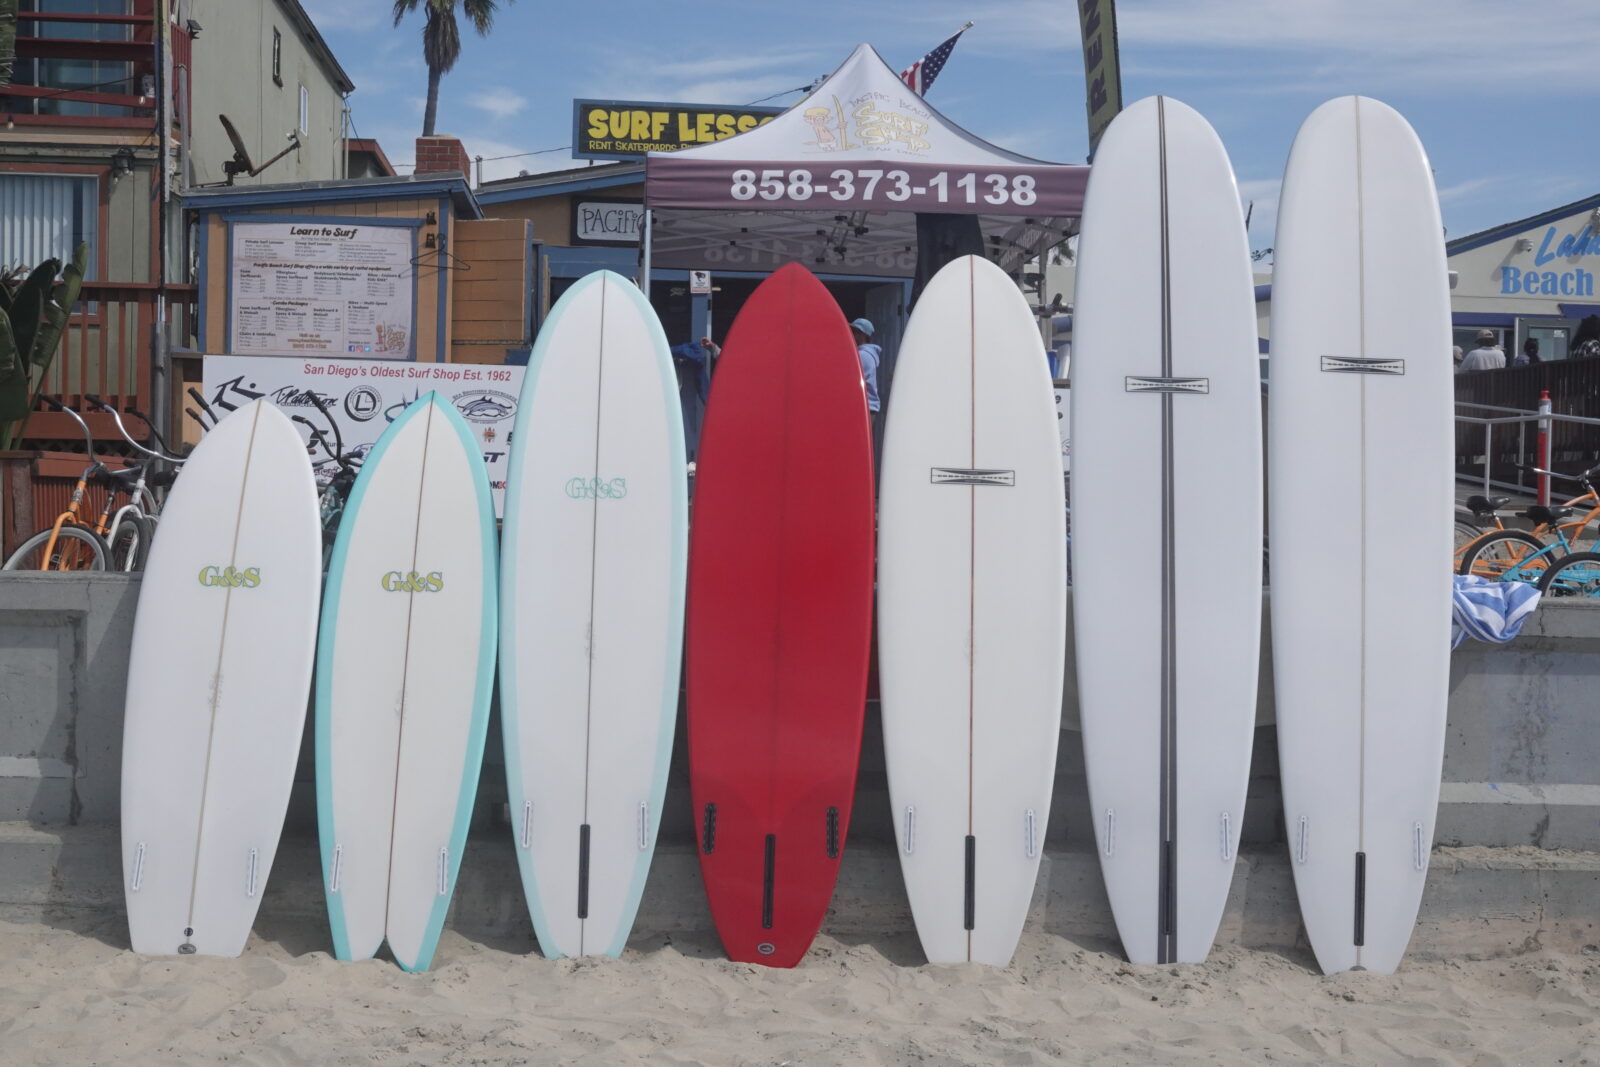 san diego surfboards for rent, san diego sumemr surf camps, surf school pacific beach, cheap surf lessons san diego, surf lessons san diego, group surf lessons san diego, surf coach san diego, surf lessons san diego ocean beach, best surf lessons san diego, private surf lessons san diego, surf camp san diego, san diego surfing academy, san diego surf school, surf coachin san diego, beginner surfing lessons san diego, can you surf in san diego, where can I surf for beginners in san diego, where can I surf for beginners in san diego, san diego surf lessons, pacific surf school san diego, surf lessons mission beach san diego, kids surf lessons san diego, san diego surf school reviews, surfing lessons california, california surf experience, surfing camp near me, surf lessons california coast, best california surf schools, san diego surf, pacific surf school, san diego surfing, ocean beach surf, beach surfing, surf camp in san diego, surf camps in san diego, surfing lessons san diego, are surf lessons worth it, how much are surf lessons, how much are surf lessons in san diego, can you surf without lessons, how much do surfing lessons cost, how to surf lessons, how much do surf lessons cost, surf lessons for adults near me, surf lessons for beginners, surf lessons for beginners, surf lessons for 6 years old, surf lessons for 6 years old, surf lessons for kids, surf lessons near me, where is the best place to learn to surf, surf camp san diego summer 2021 overnight surf camp, summer surf camp san diego, pacific surf, pacific surfing, surfing clubs, san diego surfing, san diego surf, surfing in san diego, pacific beach surf school, pacific beach surf school san diego, pacific beach surf school in san diego, surf san diego, surf schools, best surf lessons in san diego, surf lessons san diego groupon, surf lessons san diego mission beach, surf camps near me, surf camps san diego summer 2021, surf camps near me 2021, surf lessons pacific beach, shop surf boards, surf shop paddle boards, surf shop surfboards, surf shops near me, surfing camps near me, where to buy surfboards, summer surf camps near me, surf lessons in san diego, surf camp in san diego, surf rentals in san diego, surfing lessons in san diego california, surf lessons in san diego ca, surf school san diego pacific beach, pacific surf school san diego ca, how much are surf lessons in san diego, how much are surfing lessons in california, surf lessons near san diego, surfing lesson in san diego, surf camp san diego adults, best surf camps in san diego, surf vacation rentals san diego, surf rental mission beach san diego, surfboard rental in san diego, surfboard rentals san diego ca, surfing lessons san diego ca, best private surf lessons san diego, best surf